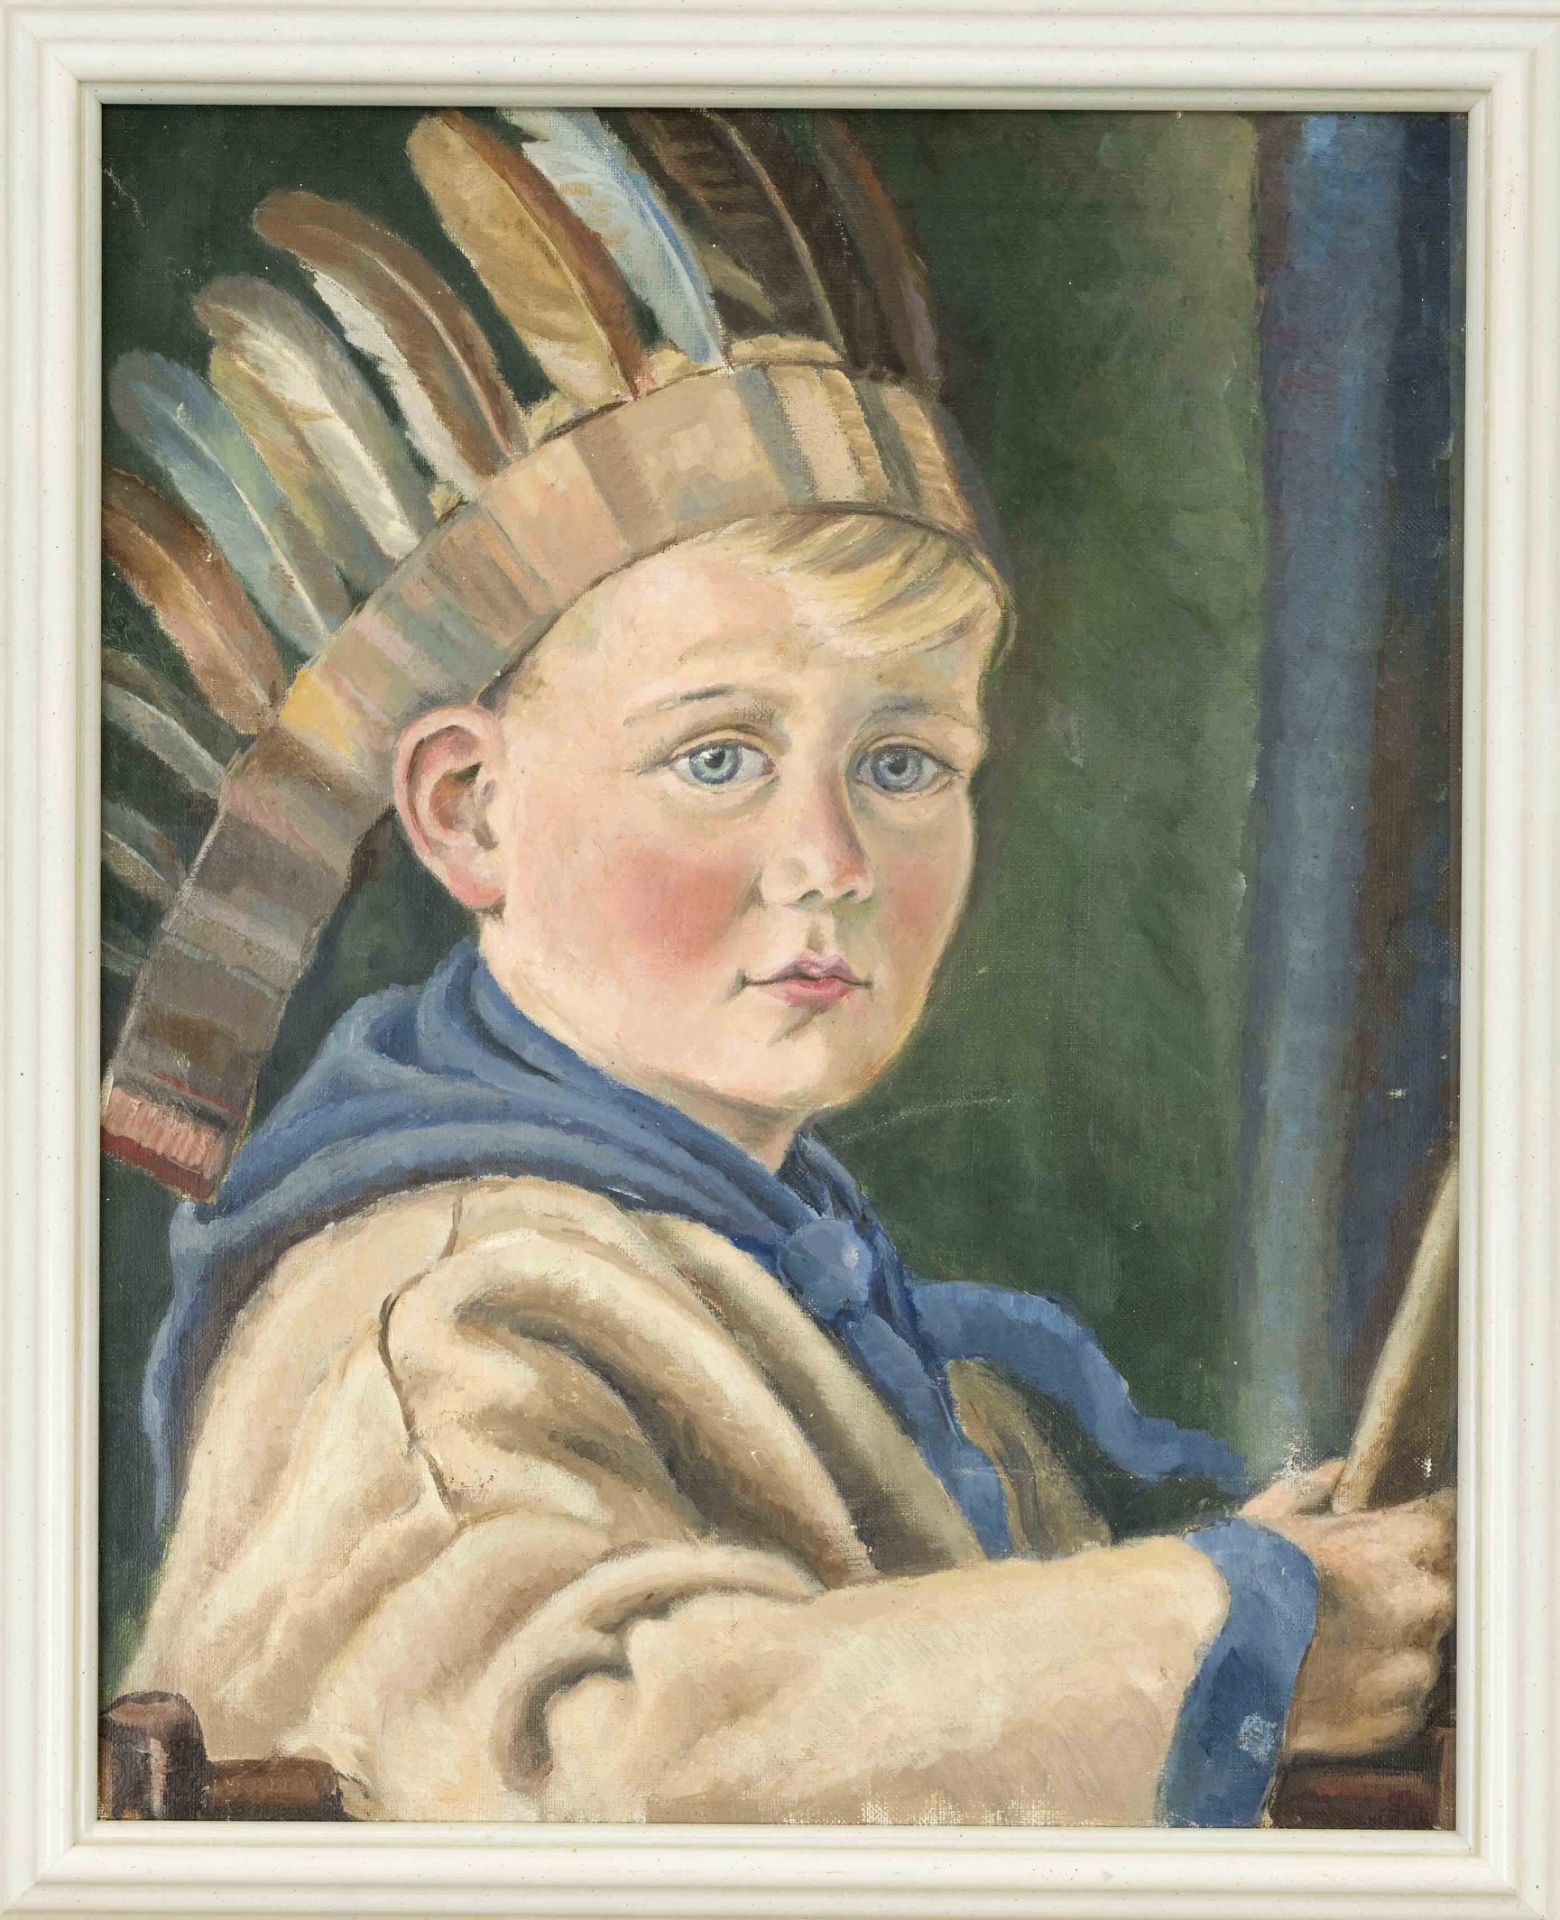 Anonymous artist c. 1930, Portrait of a boy in an Indian costume, oil on canvas, unsigned, small